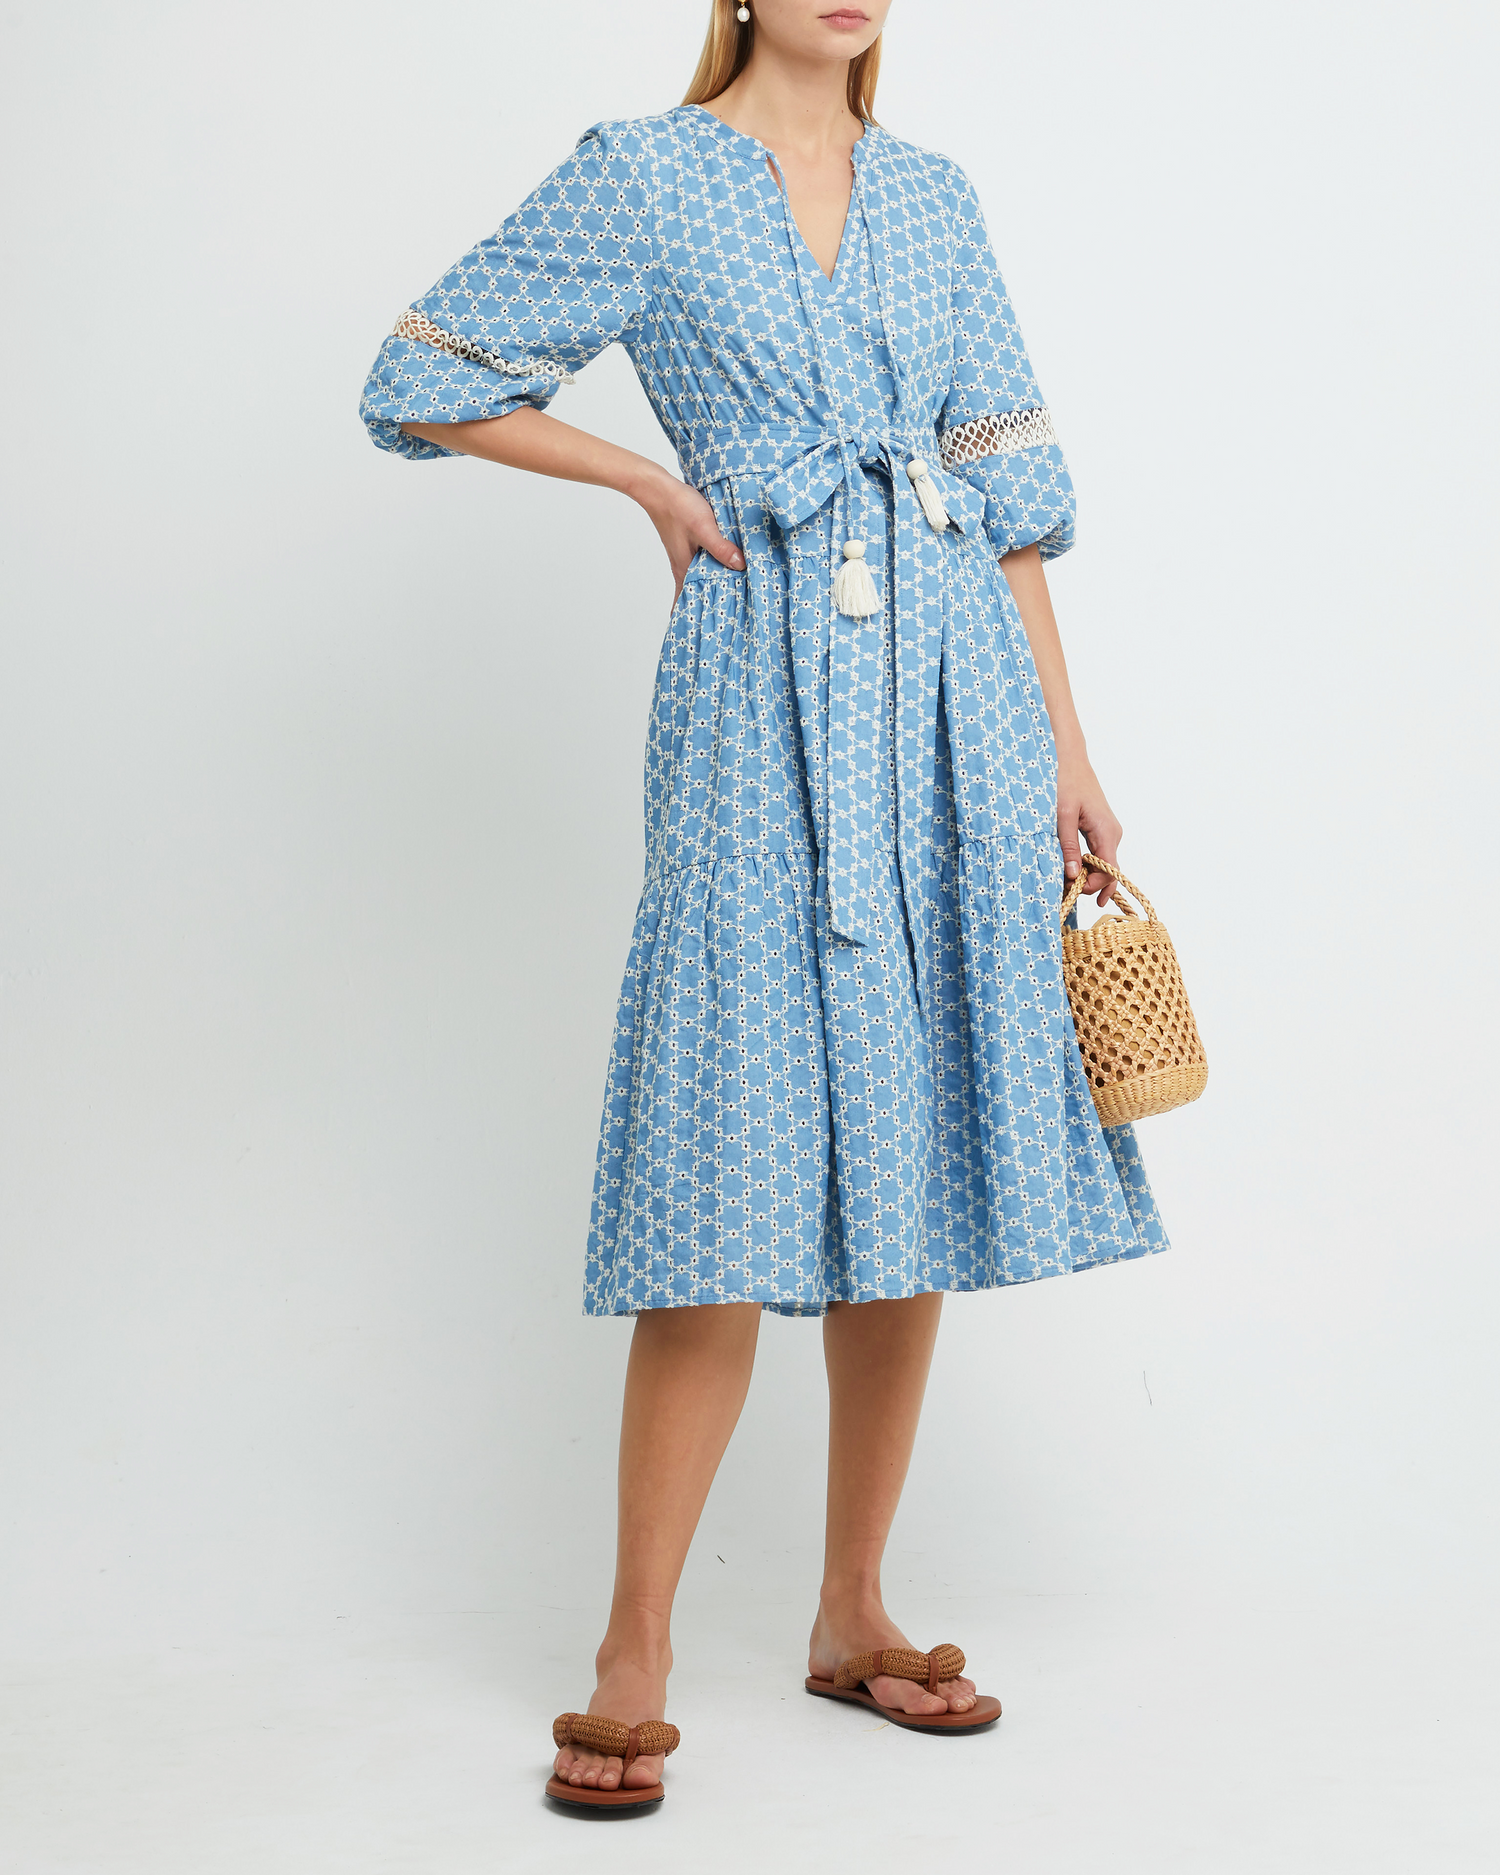 Fourth image of Haven Dress, a blue midi dress, lace detail, eyelet, waist tie, bow, wrap dress, puff sleeves